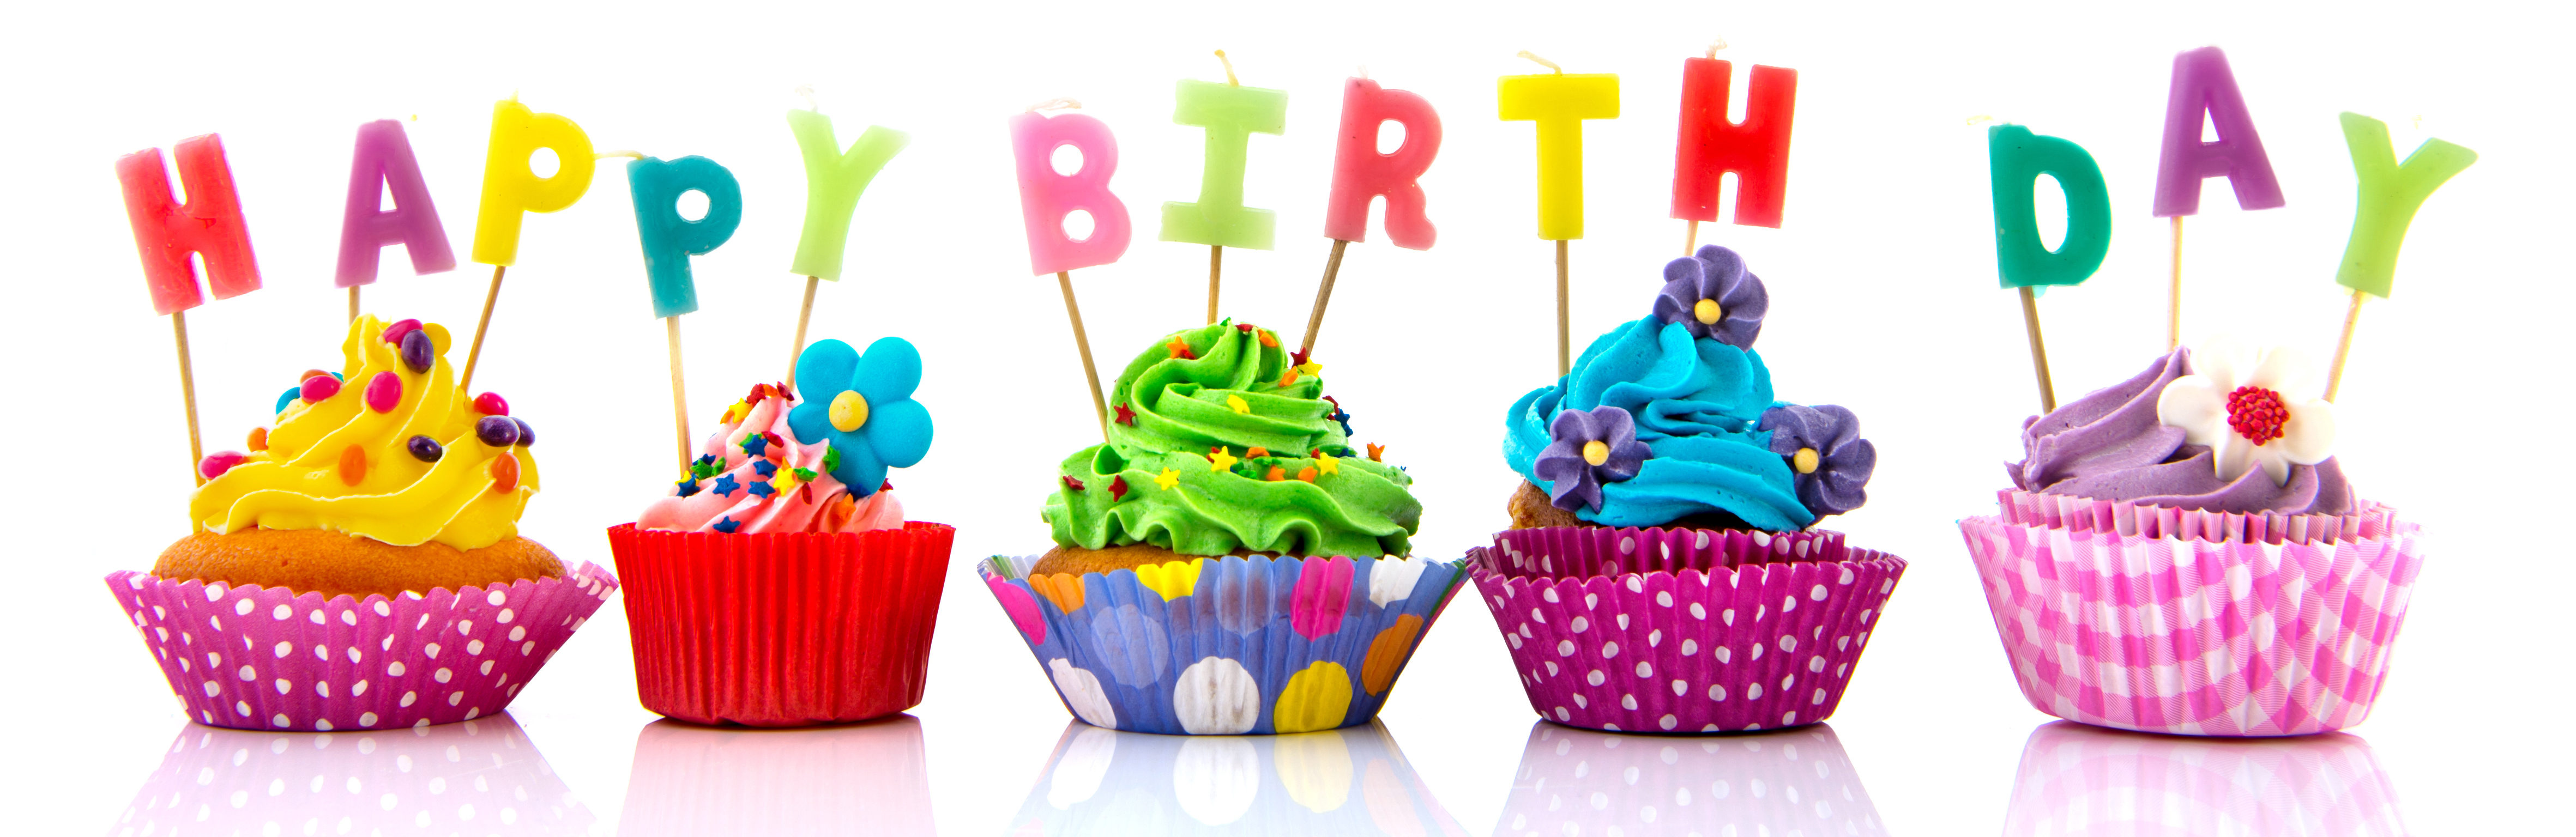 Nice Images Collection: Birthday Desktop Wallpapers